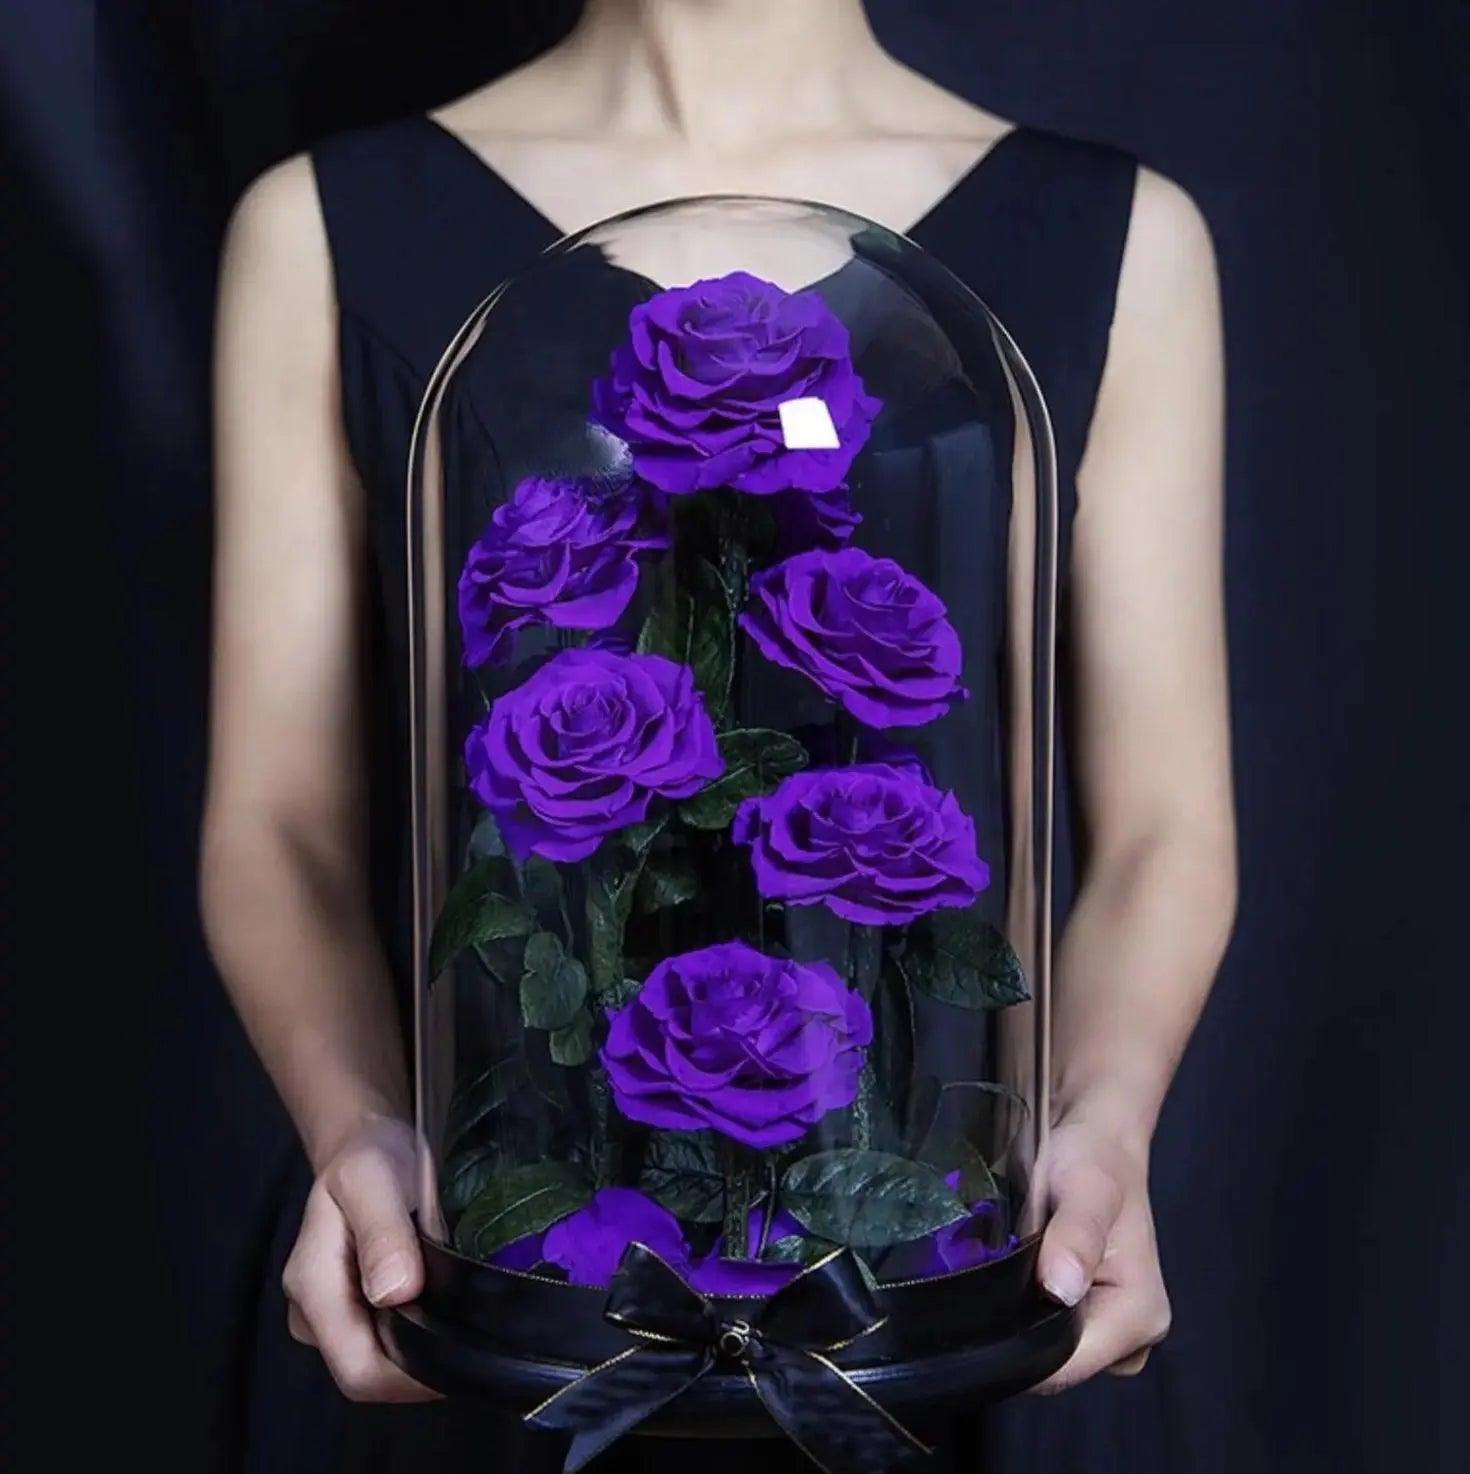 Crystal Clear Rose Selection - Imaginary Worlds